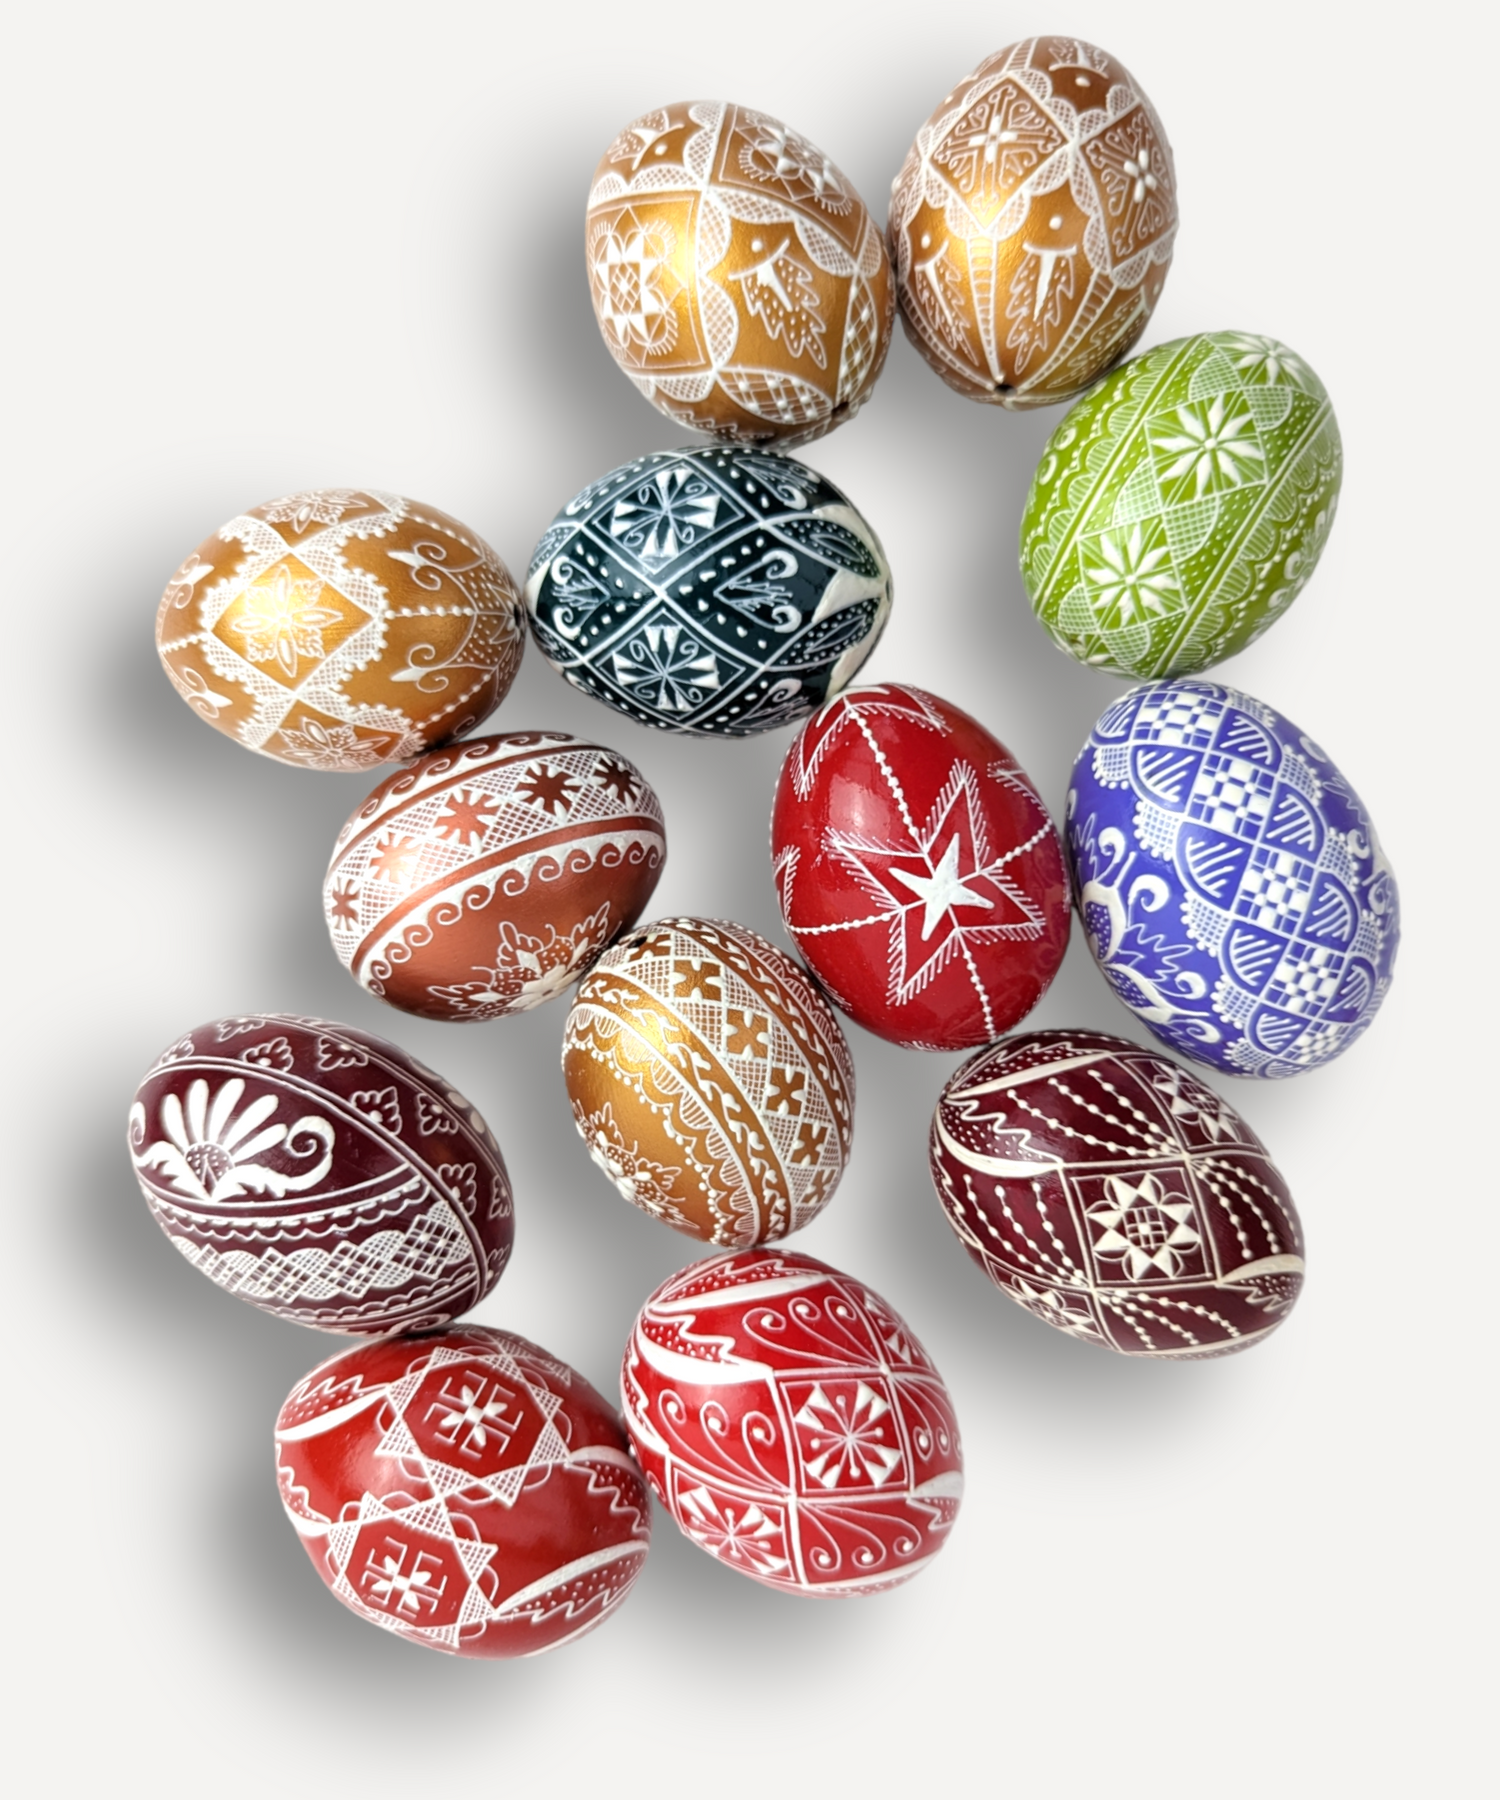 Gold Hand-Painted Eggs